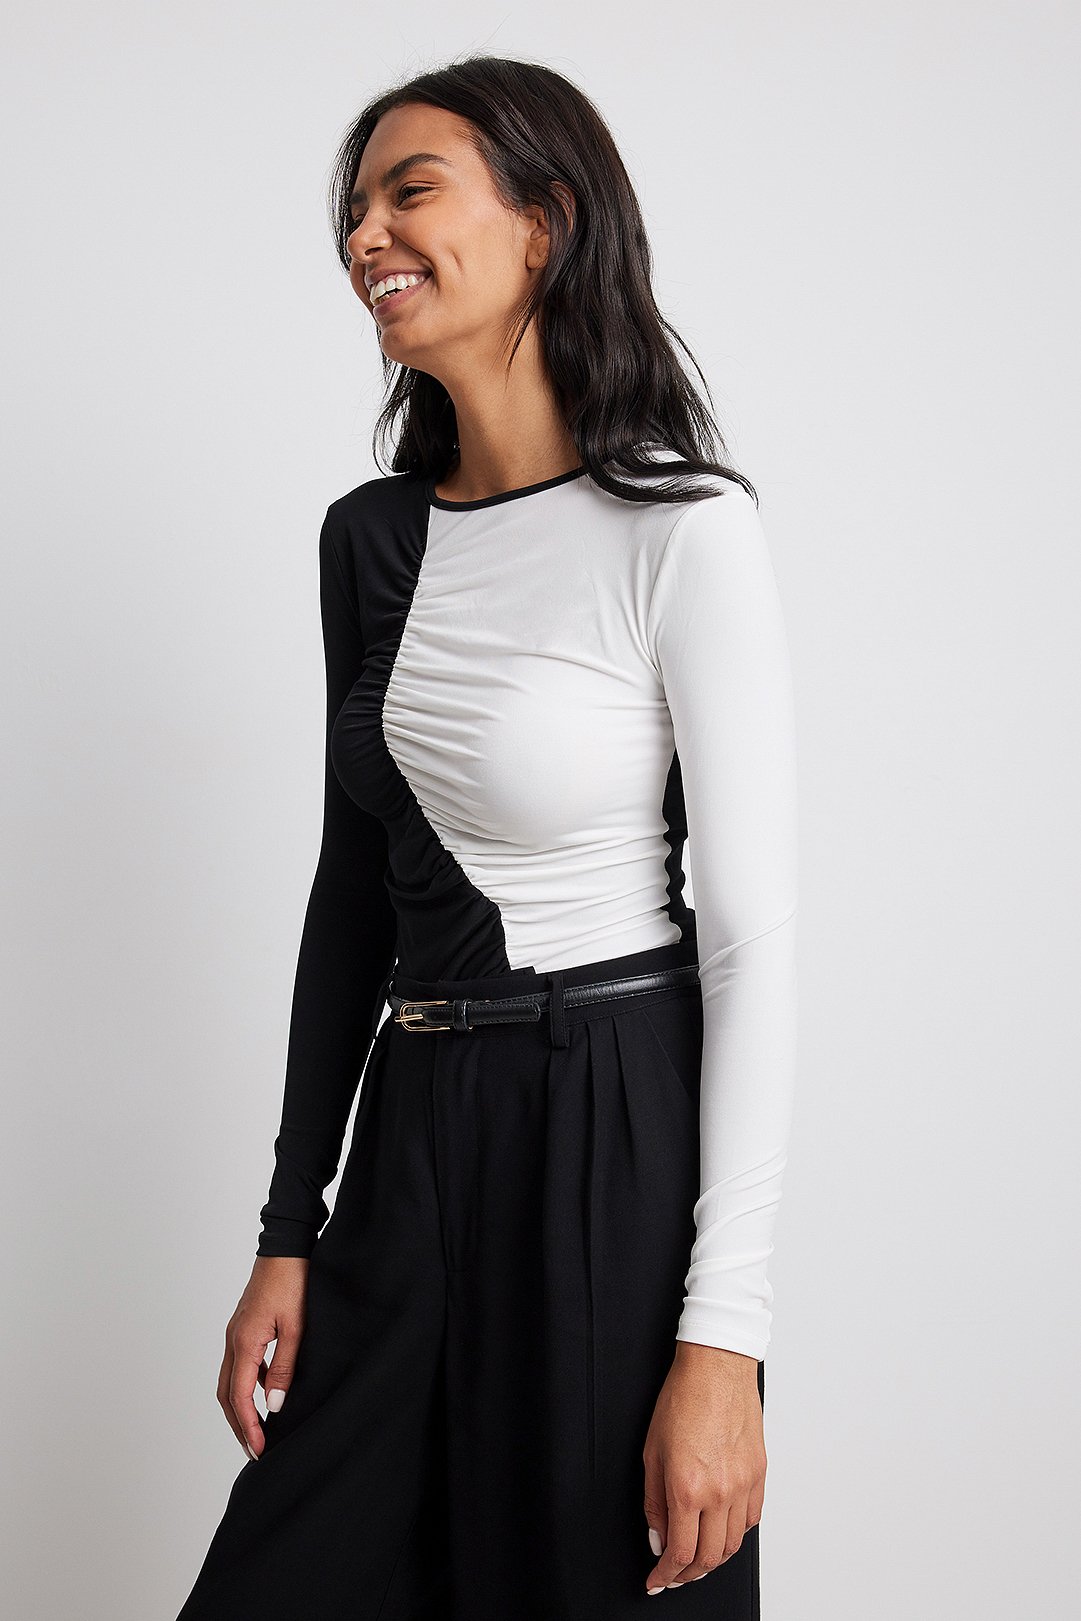 Black/White Color Block Rouched Top